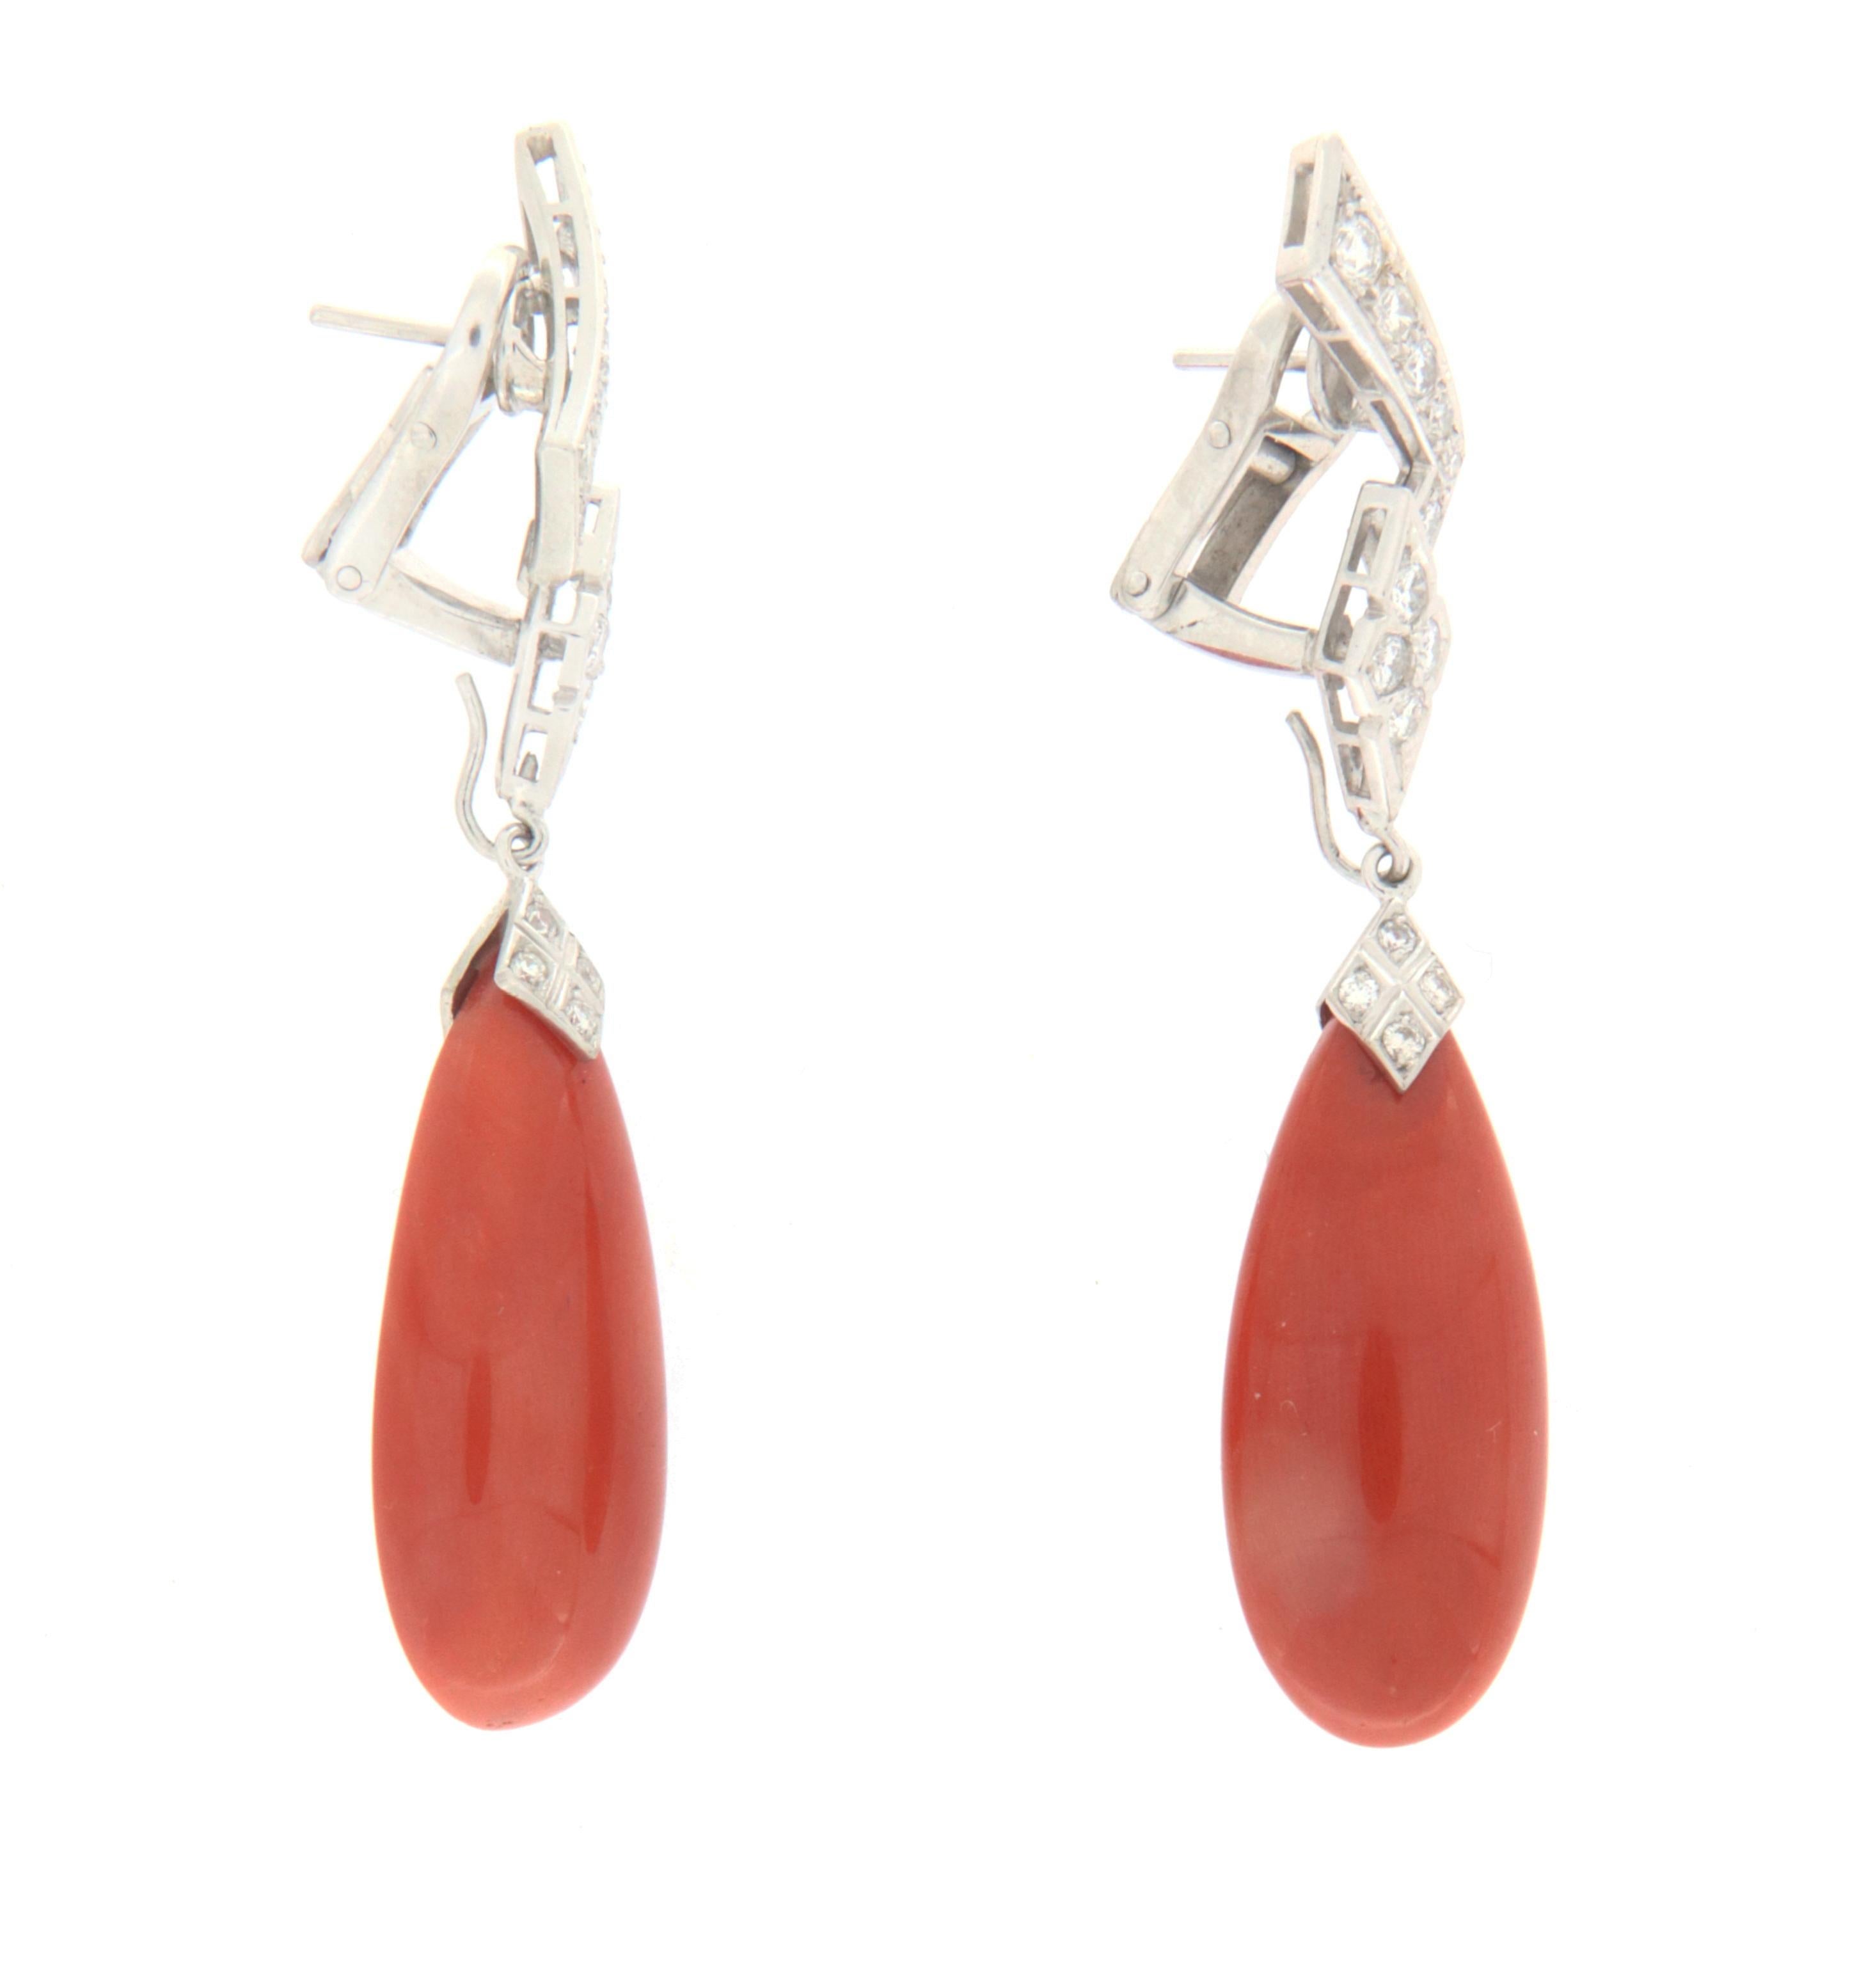 These exclusive earrings in 18-karat white gold represent a perfect blend of the sea's grace and sparkling luxury. At their heart, exquisite drops of red coral dangle elegantly, evoking the image of a sunset over the ocean. These natural gems,